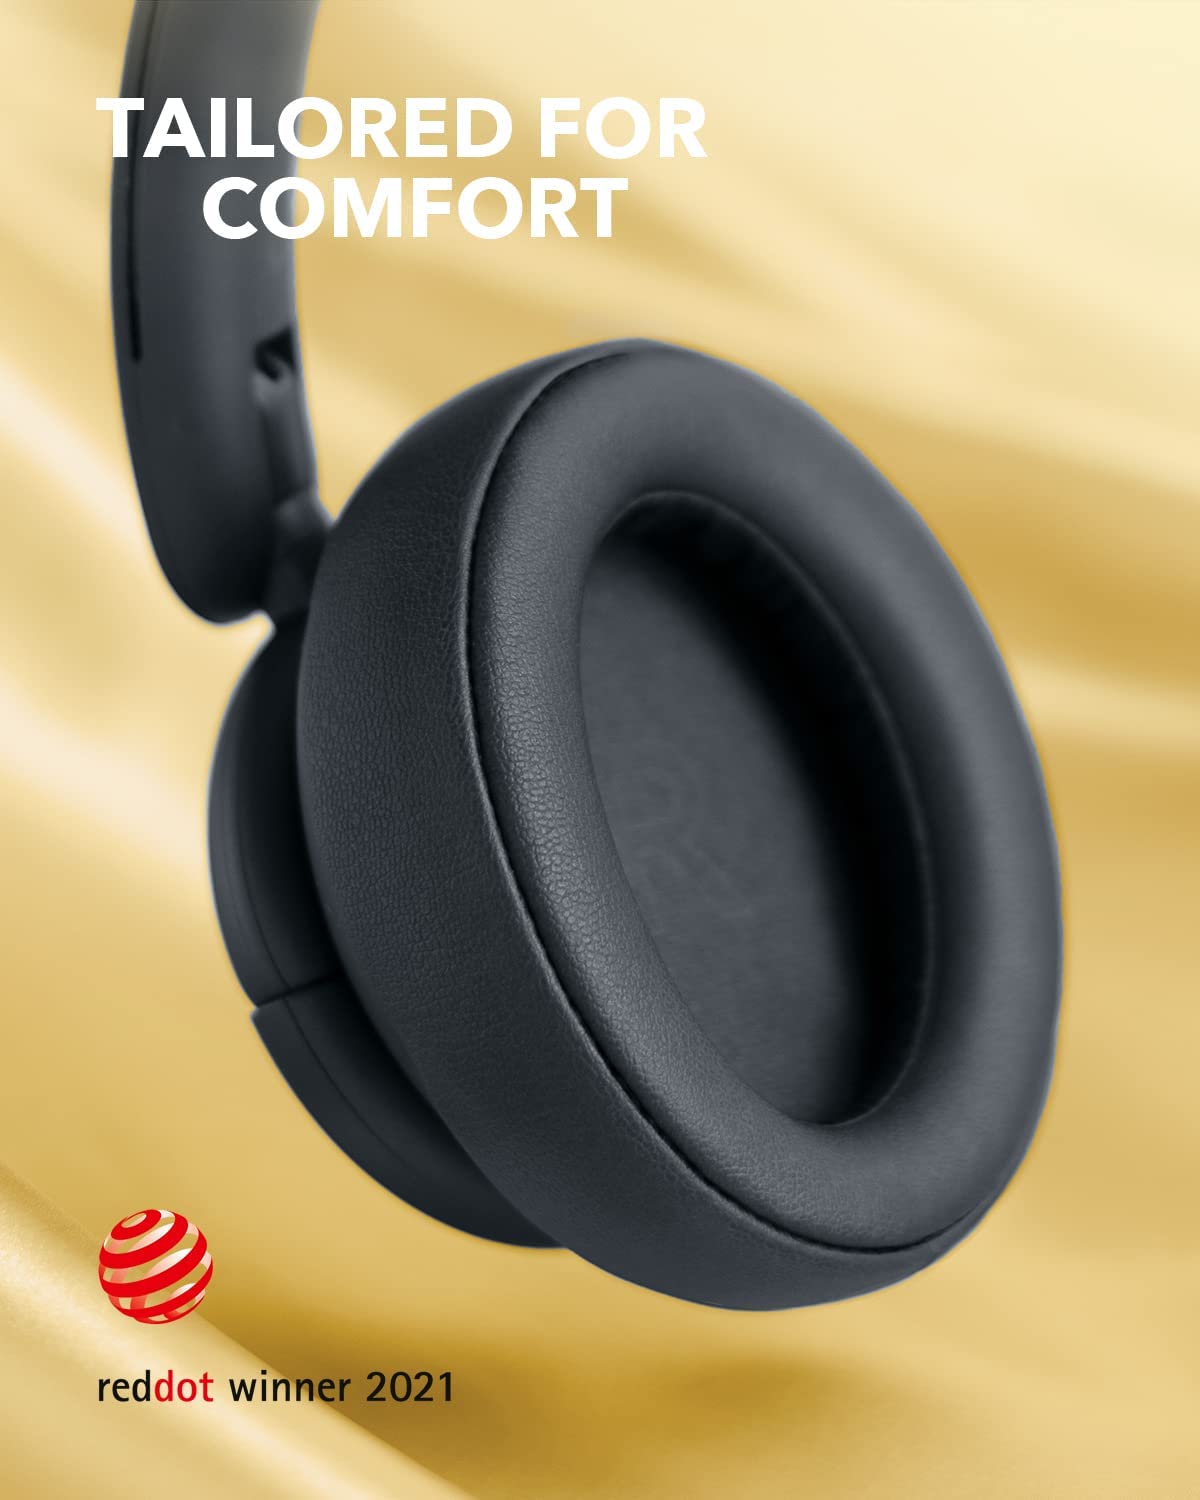 Wireless Noise-Cancelling Headphones with Hi-Res Sound